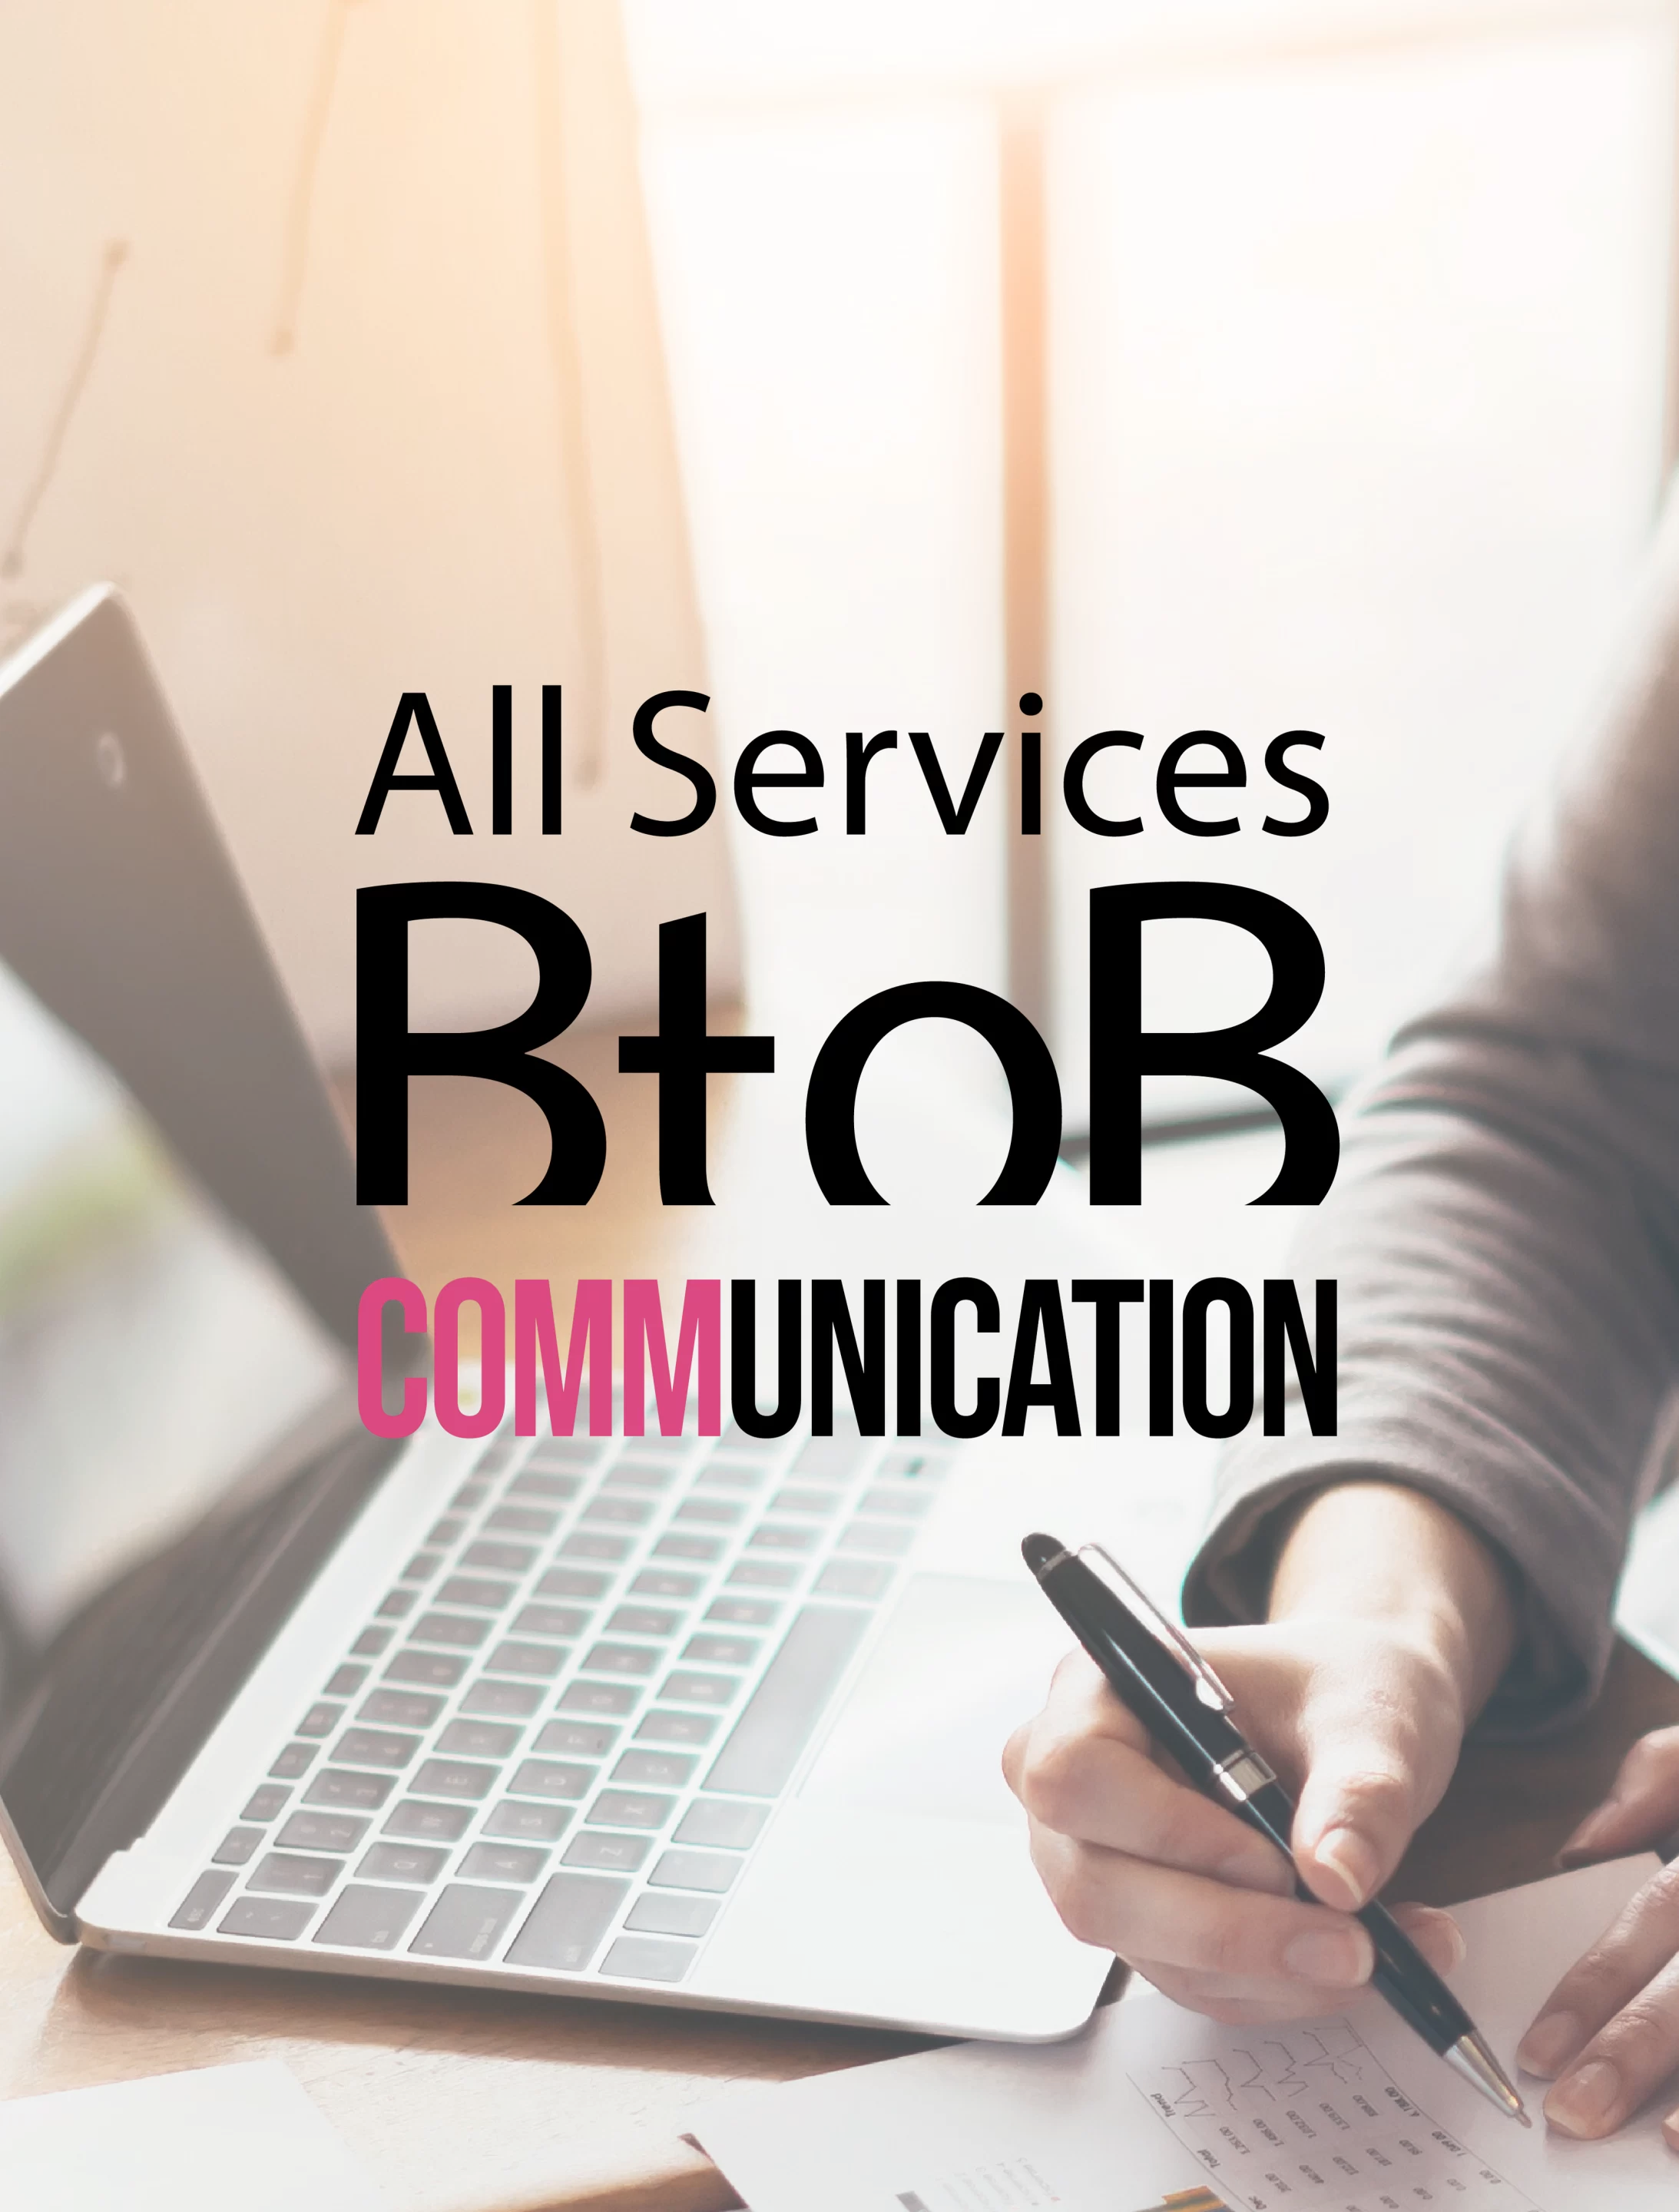 All-Services-BtoB-approche-conviction_accueil-rubrique-communication-1-scaled Formation  